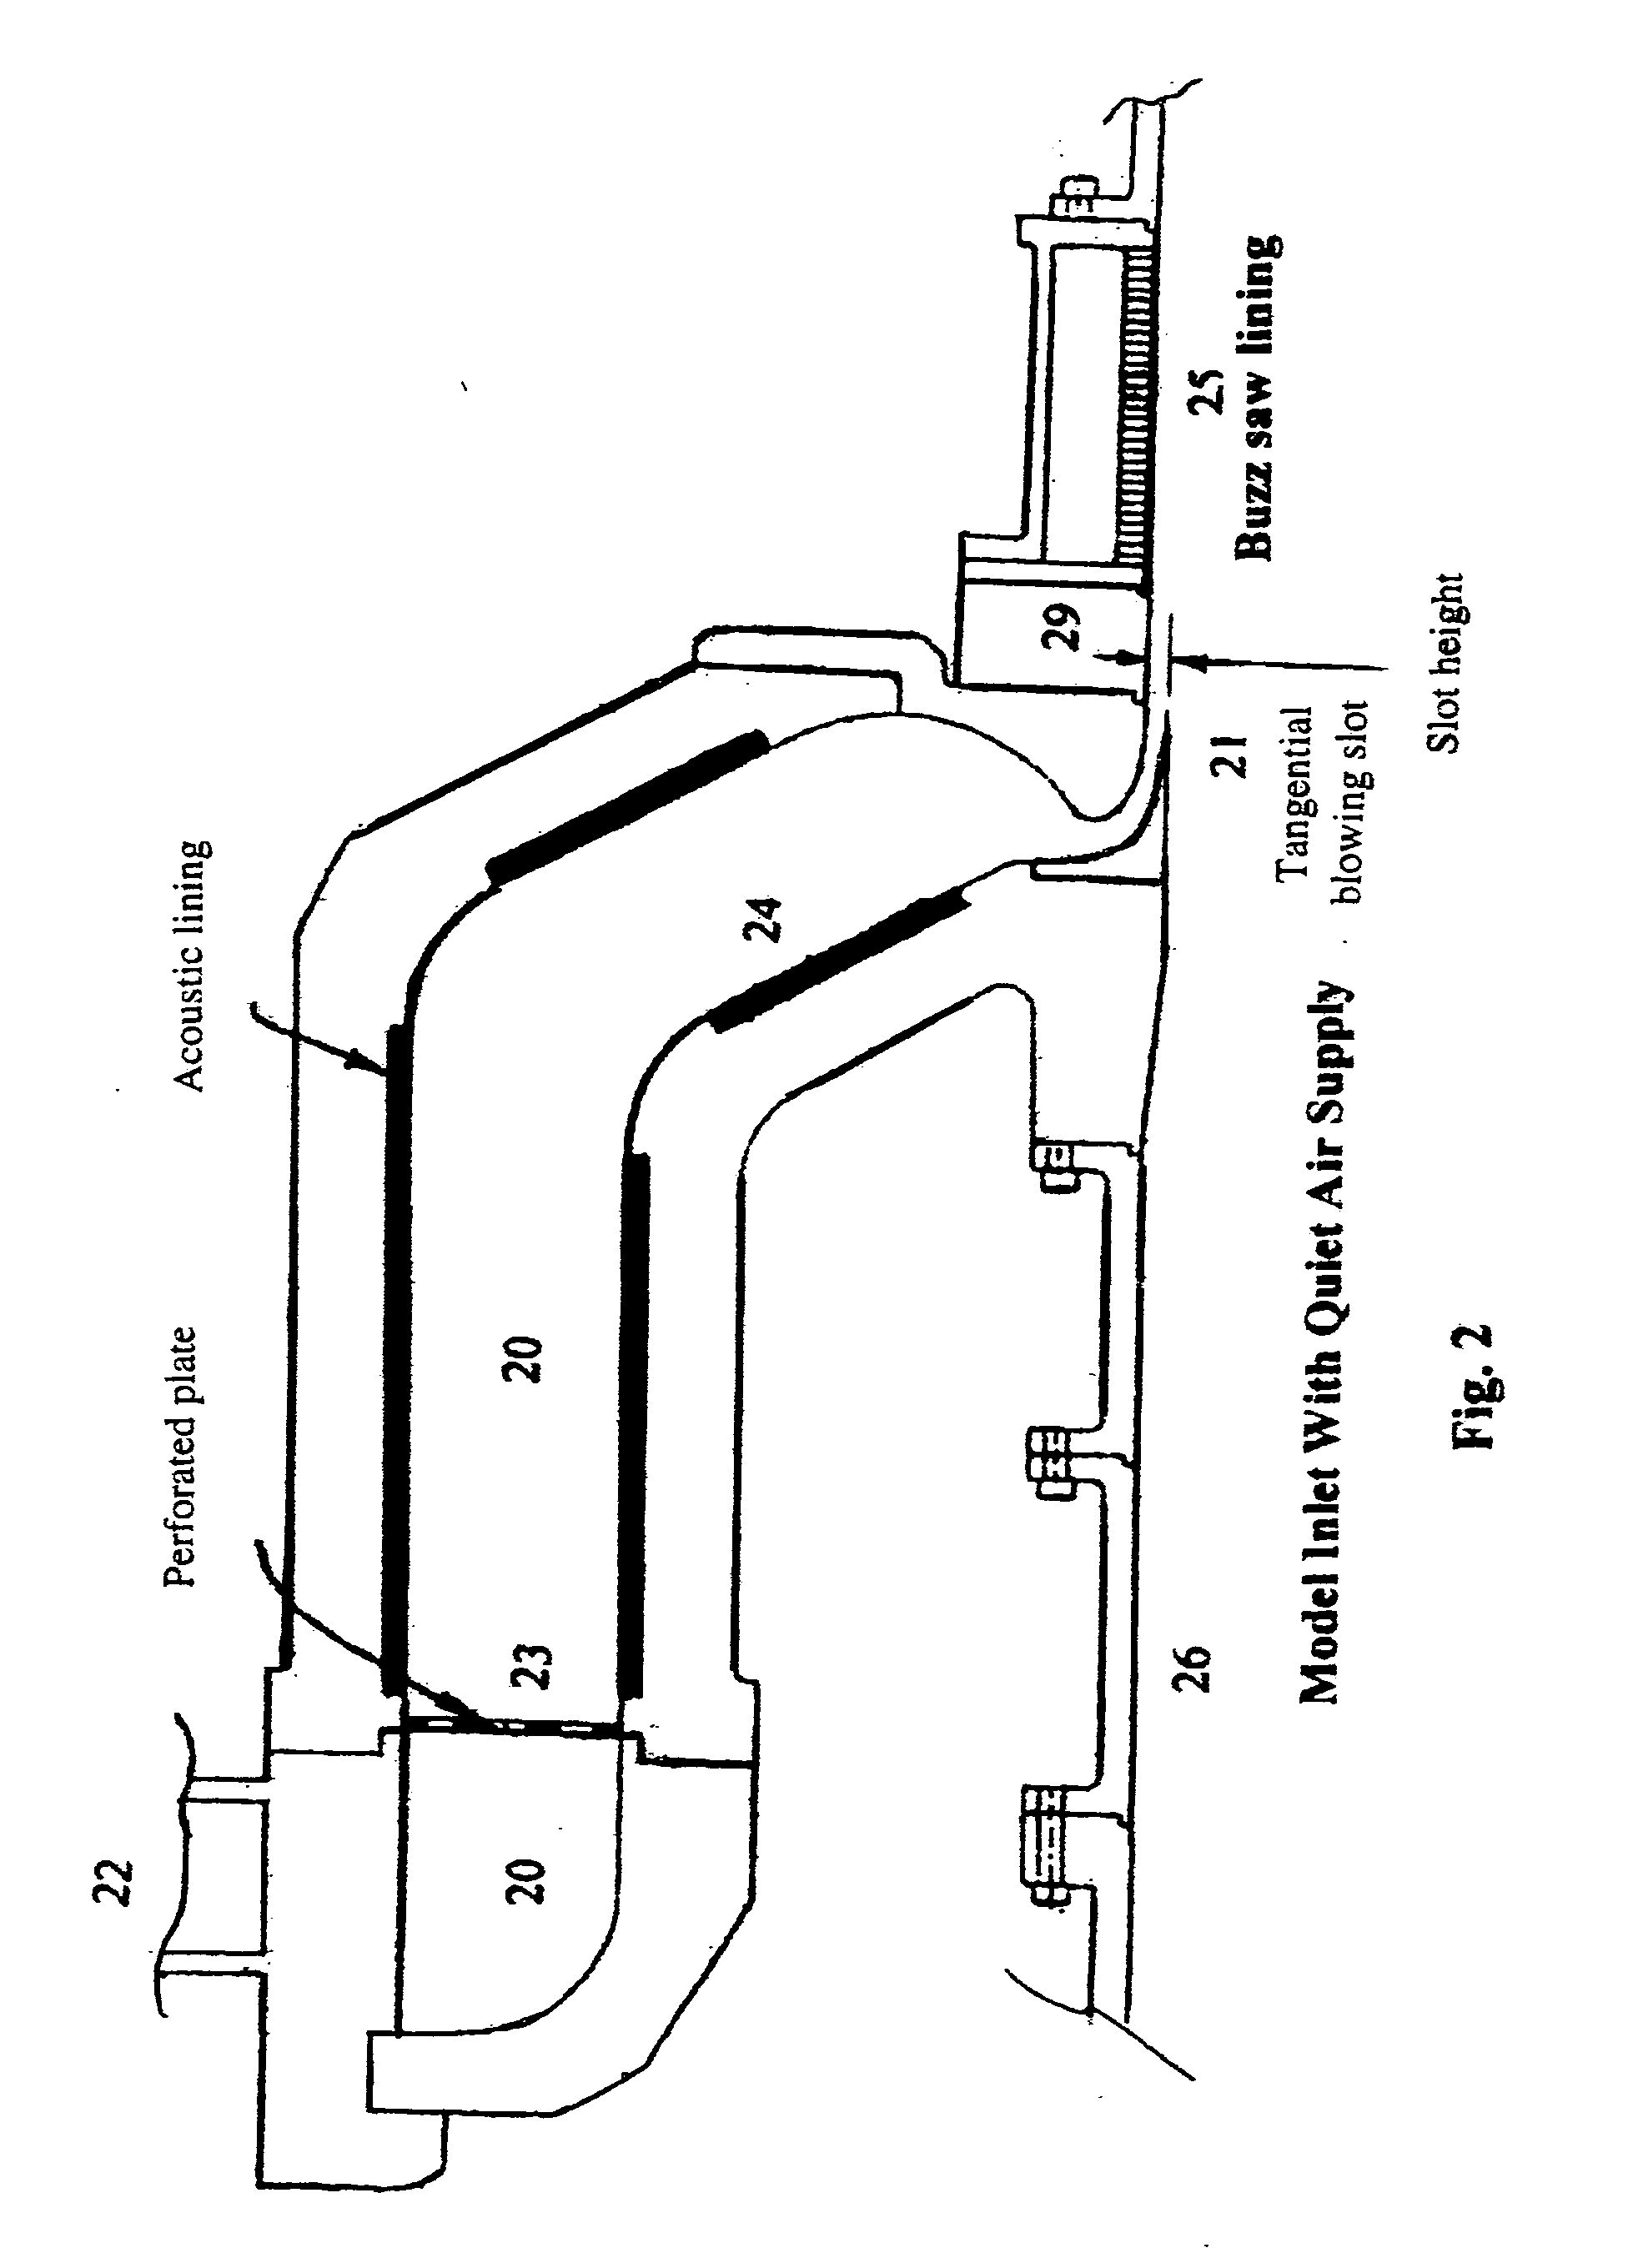 Aviation engine inlet with tangential blowing for buzz saw noise control